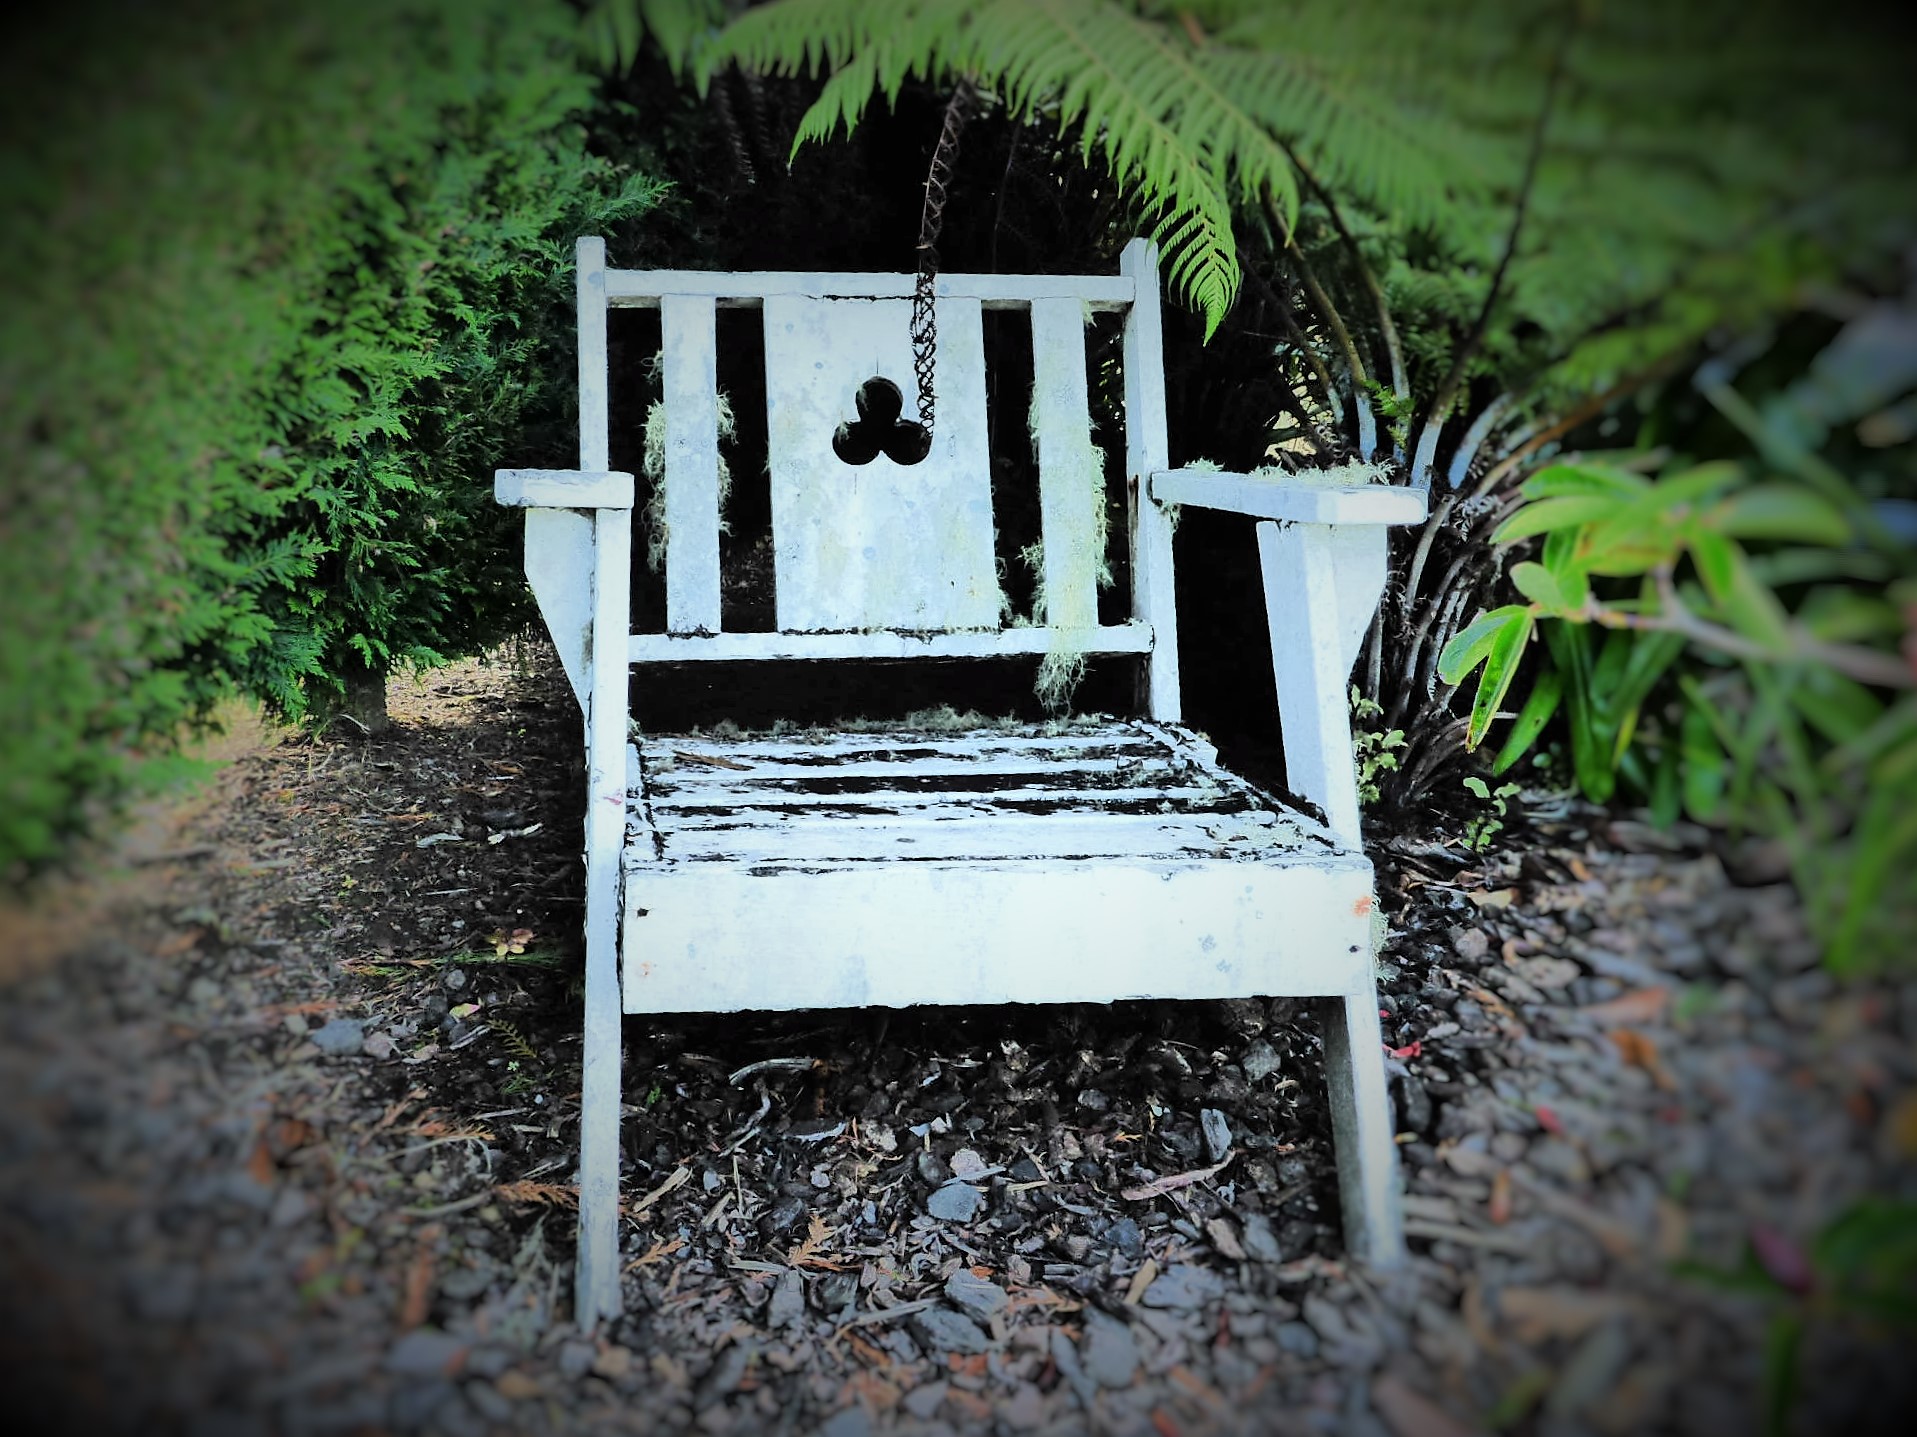 Little chair  by Lewis & Co. Photography